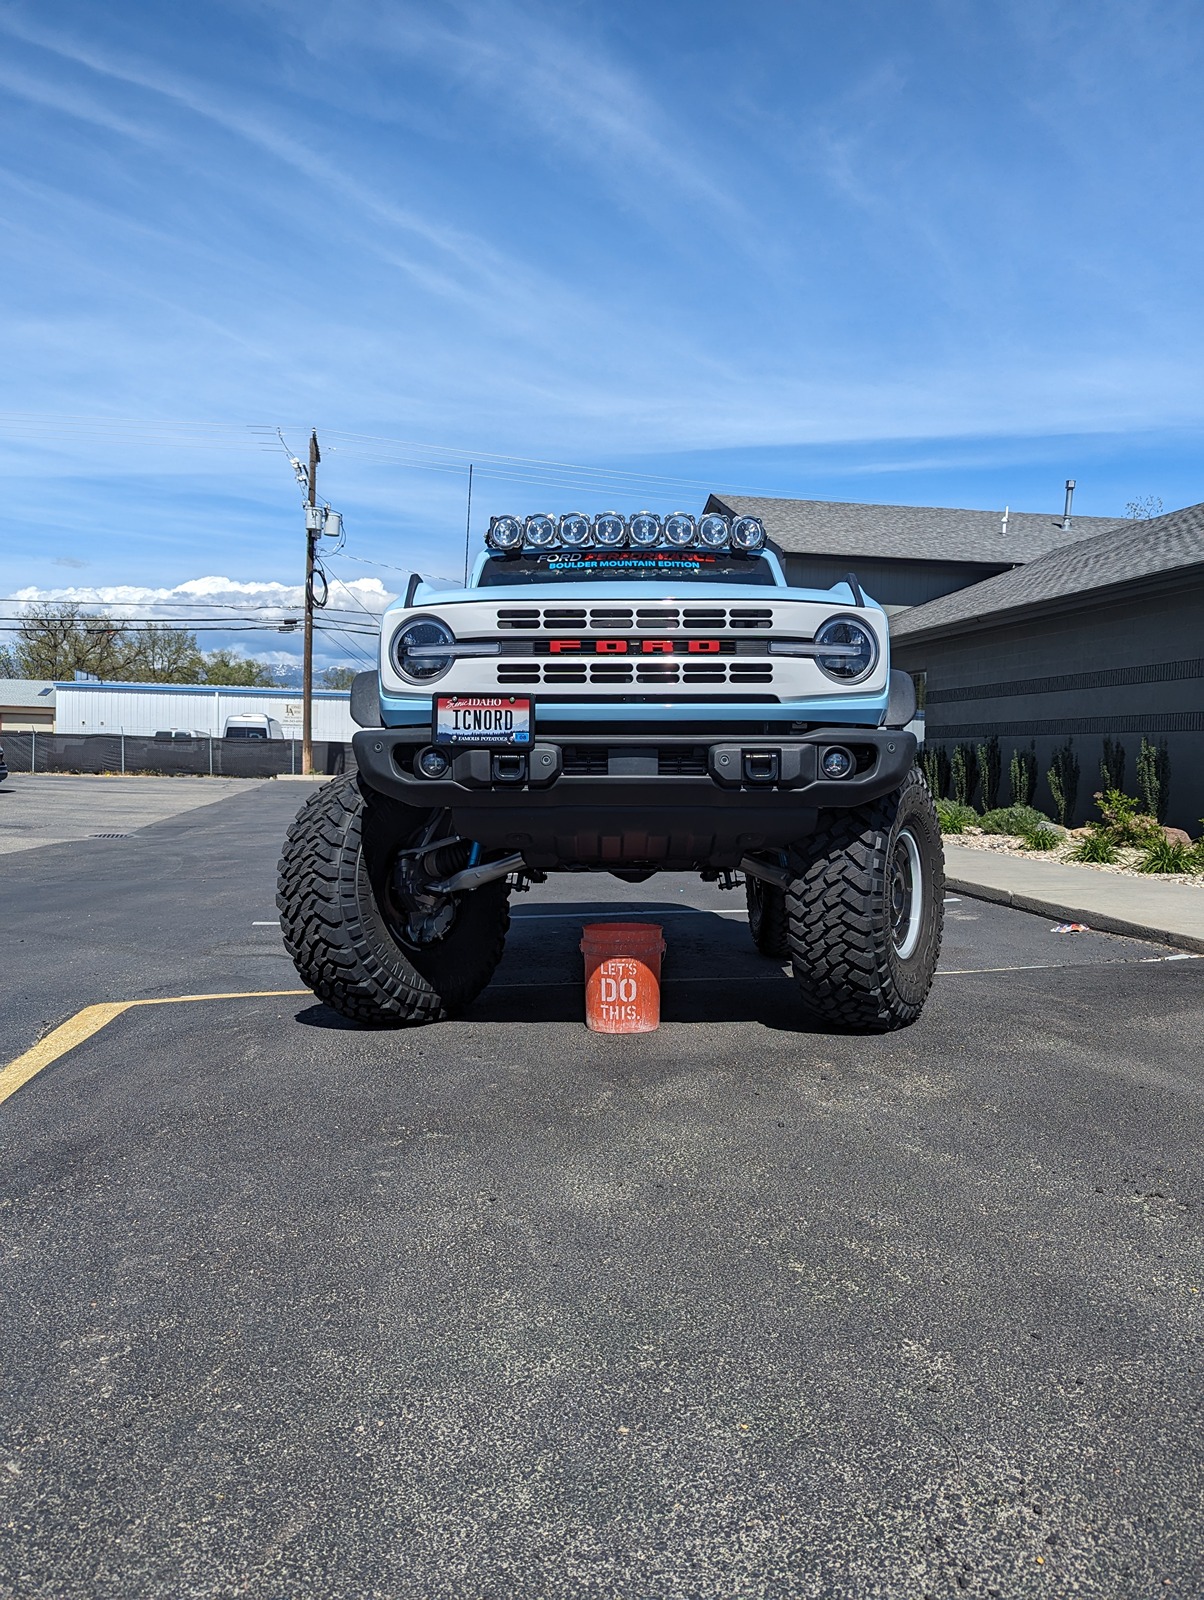 Ford Bronco The new Boulder Mountain Edition Build .... (prototype) Clearance for days